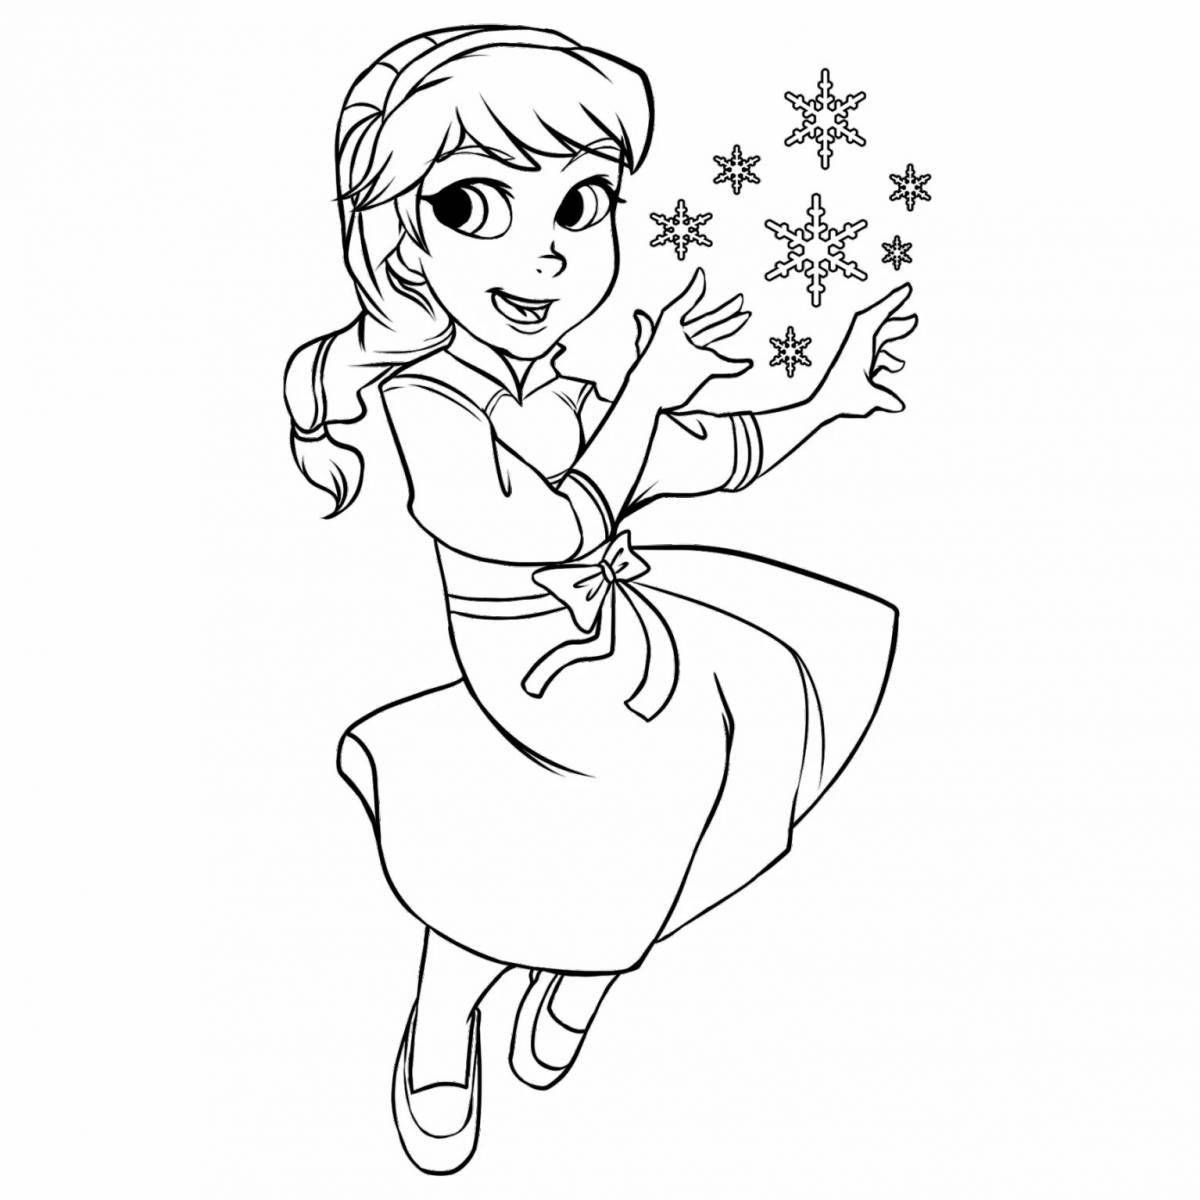 Royal keepers of miracles coloring page